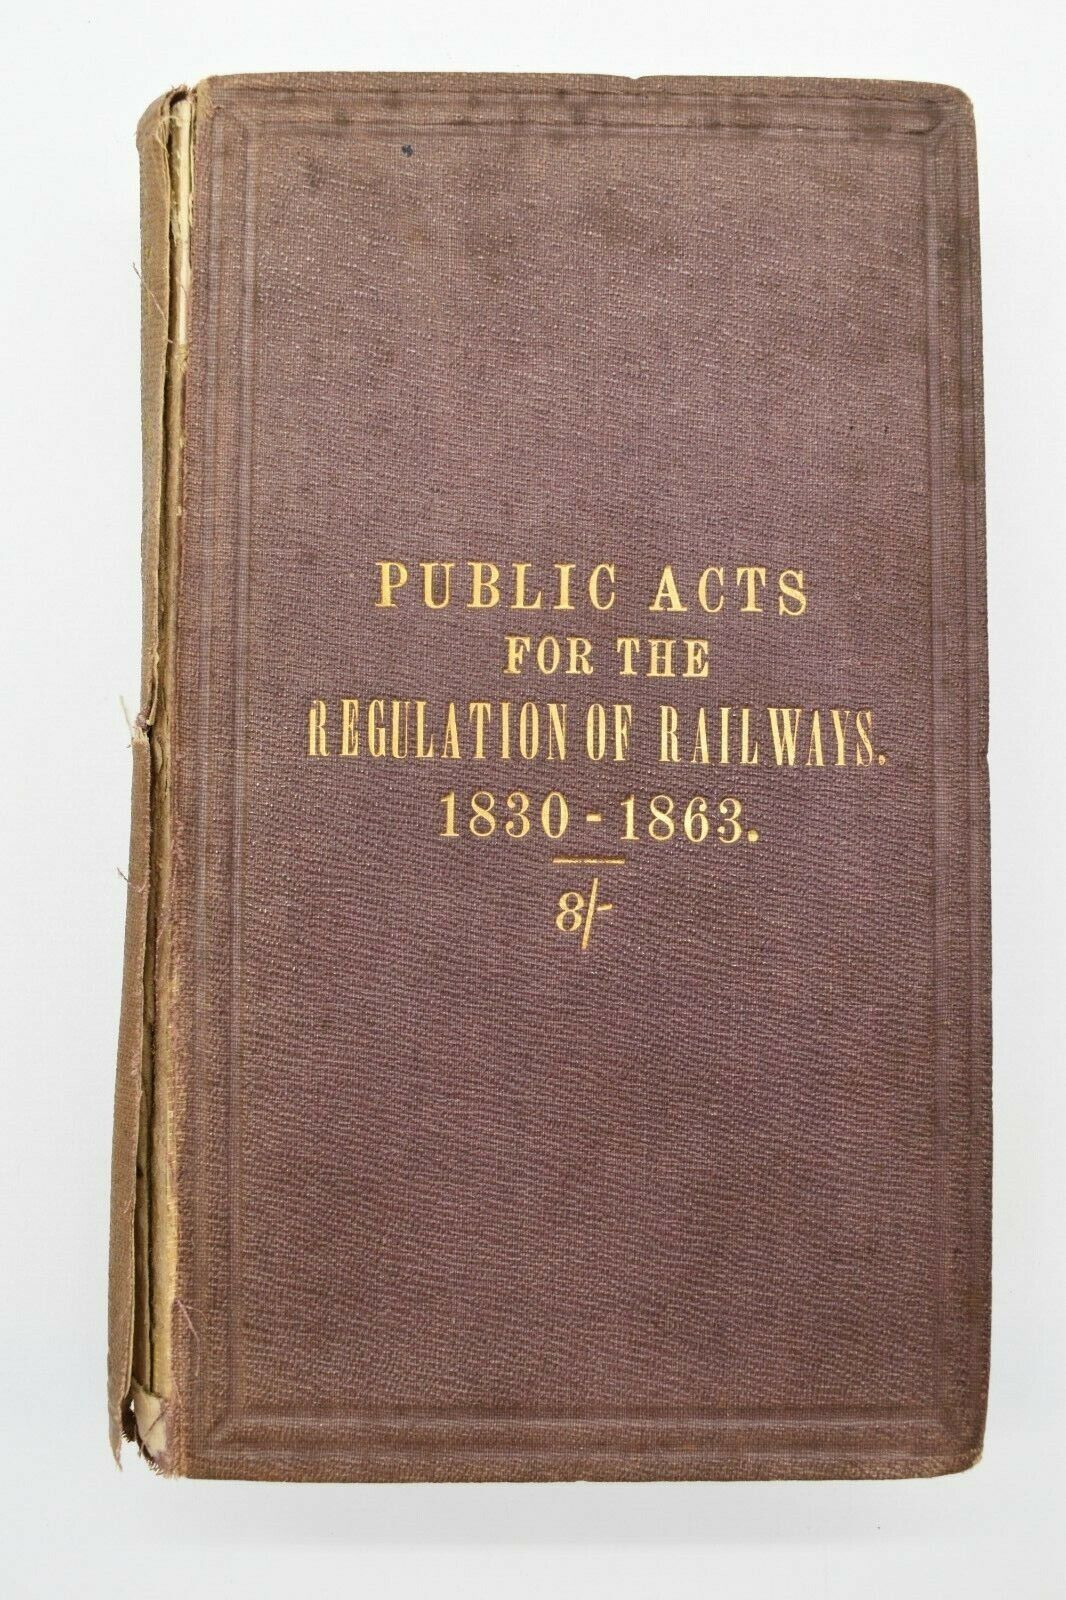 Public Acts For The Regulation Of Railways Book 1830 - 1863